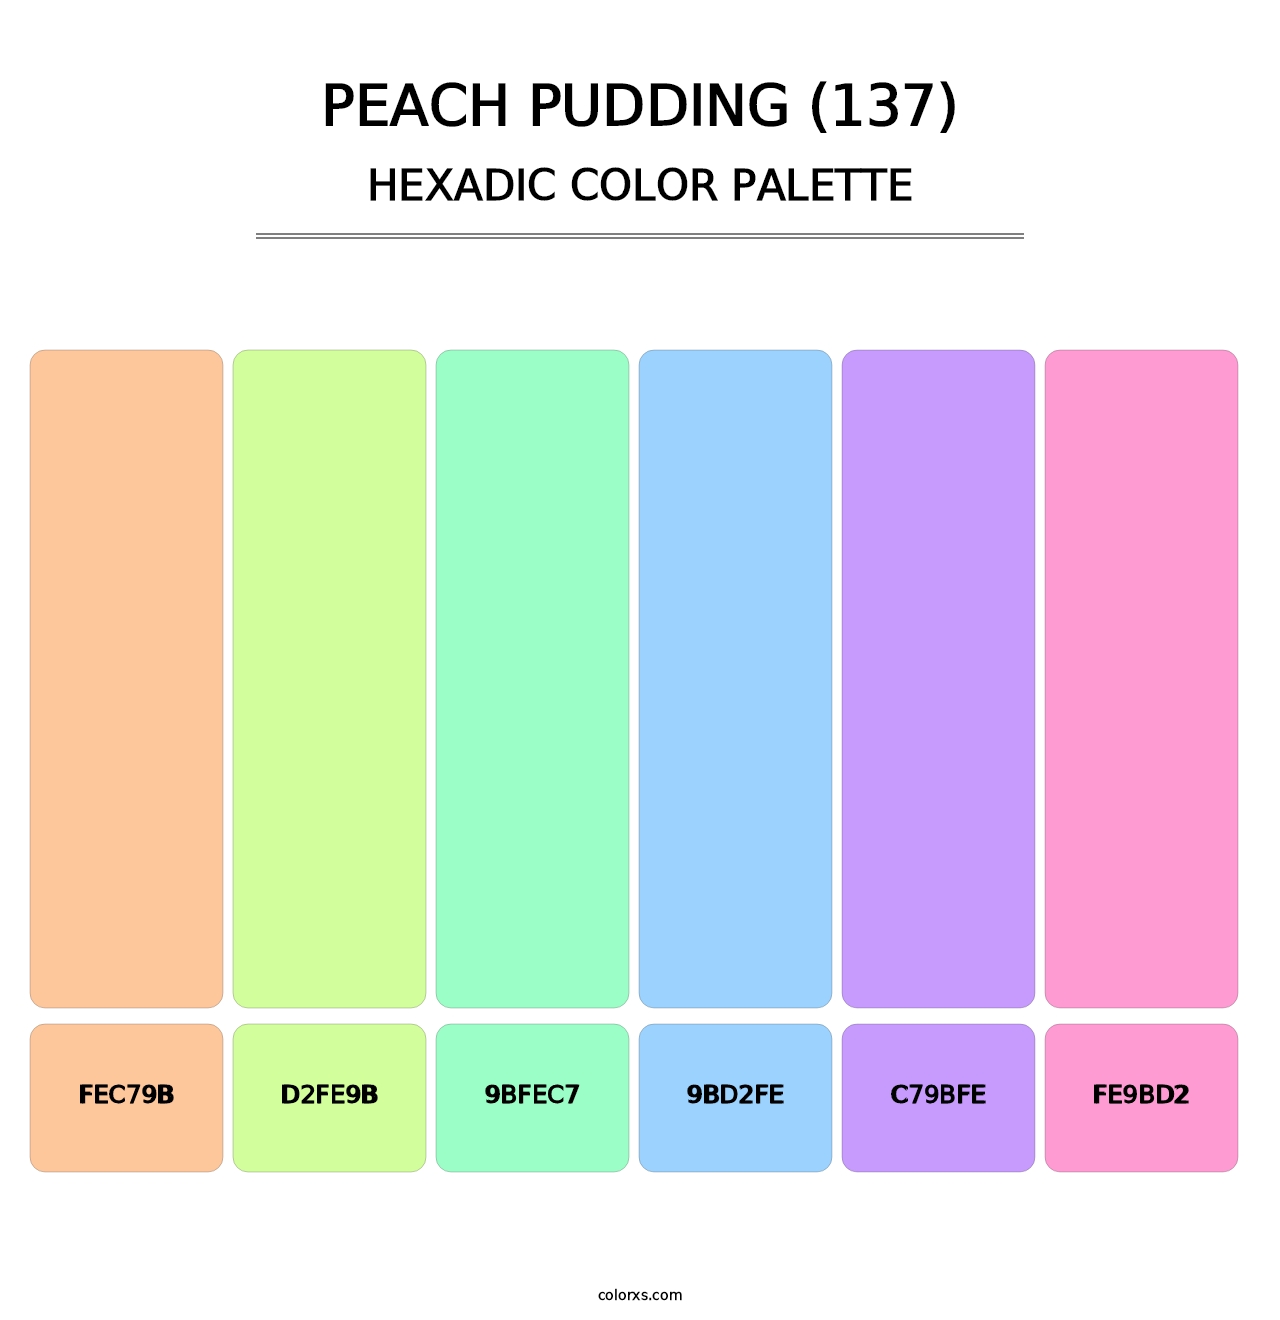 Peach Pudding (137) - Hexadic Color Palette